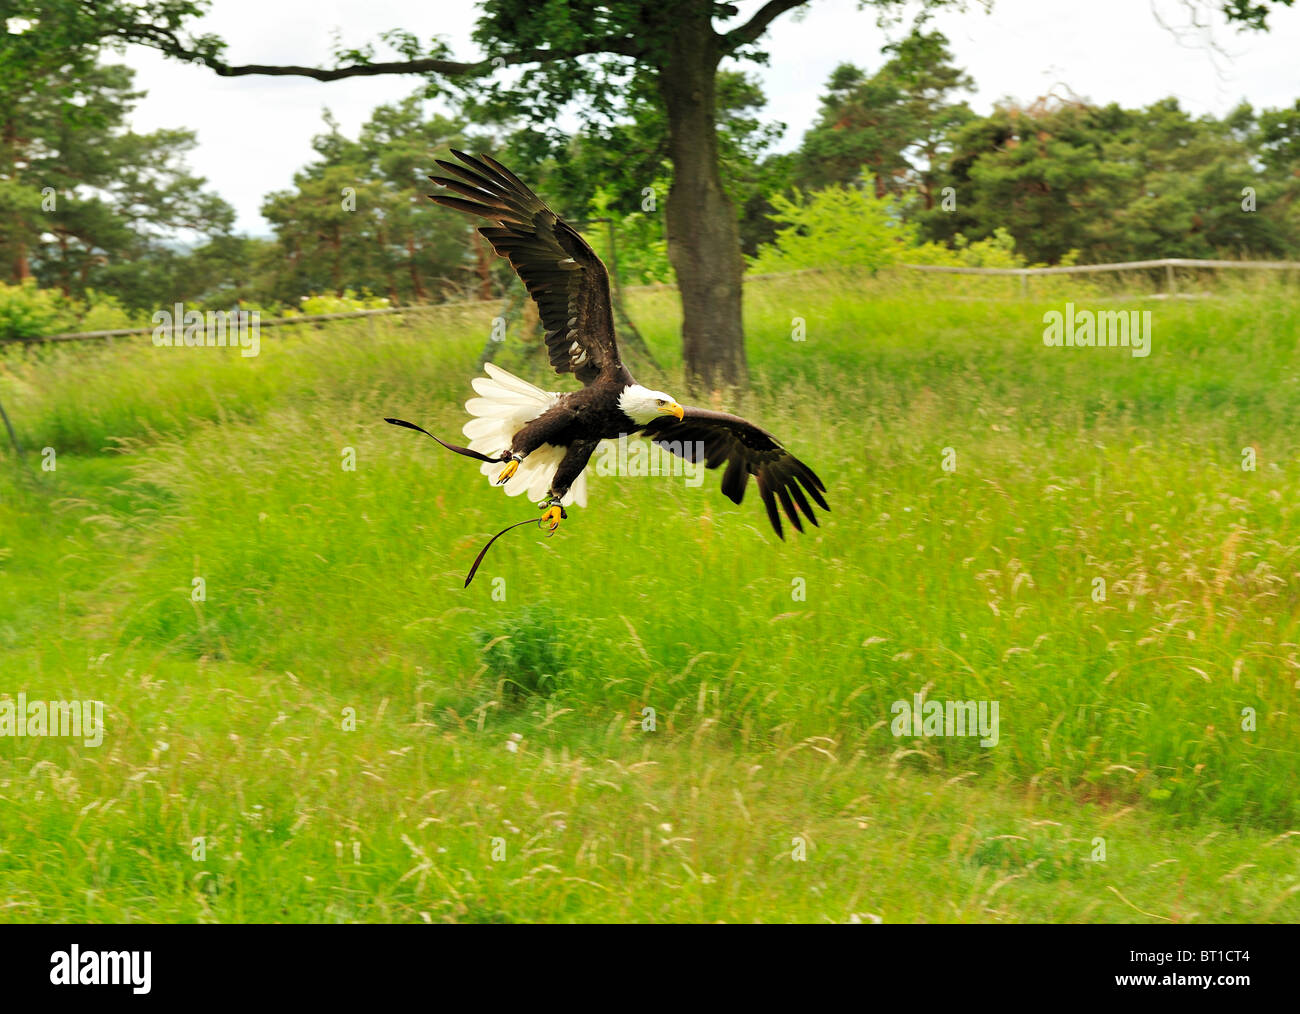 Bald eagle flying free over meadow, wings spread. Stock Photo